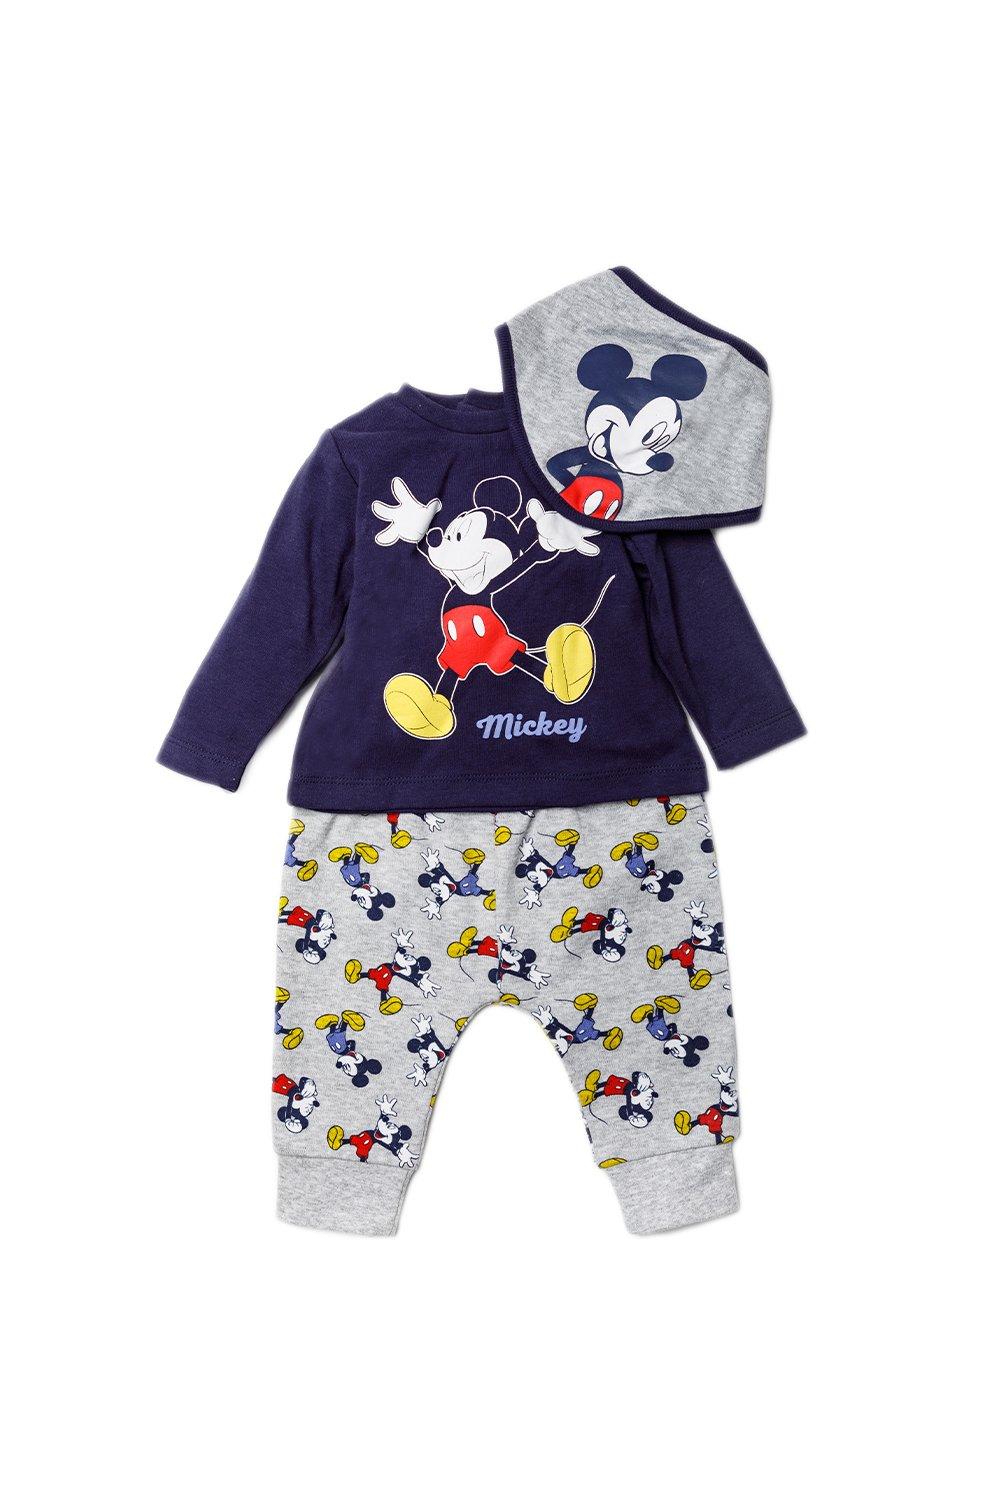 Mickey Mouse Print Cotton 3-Piece Baby Gift Set